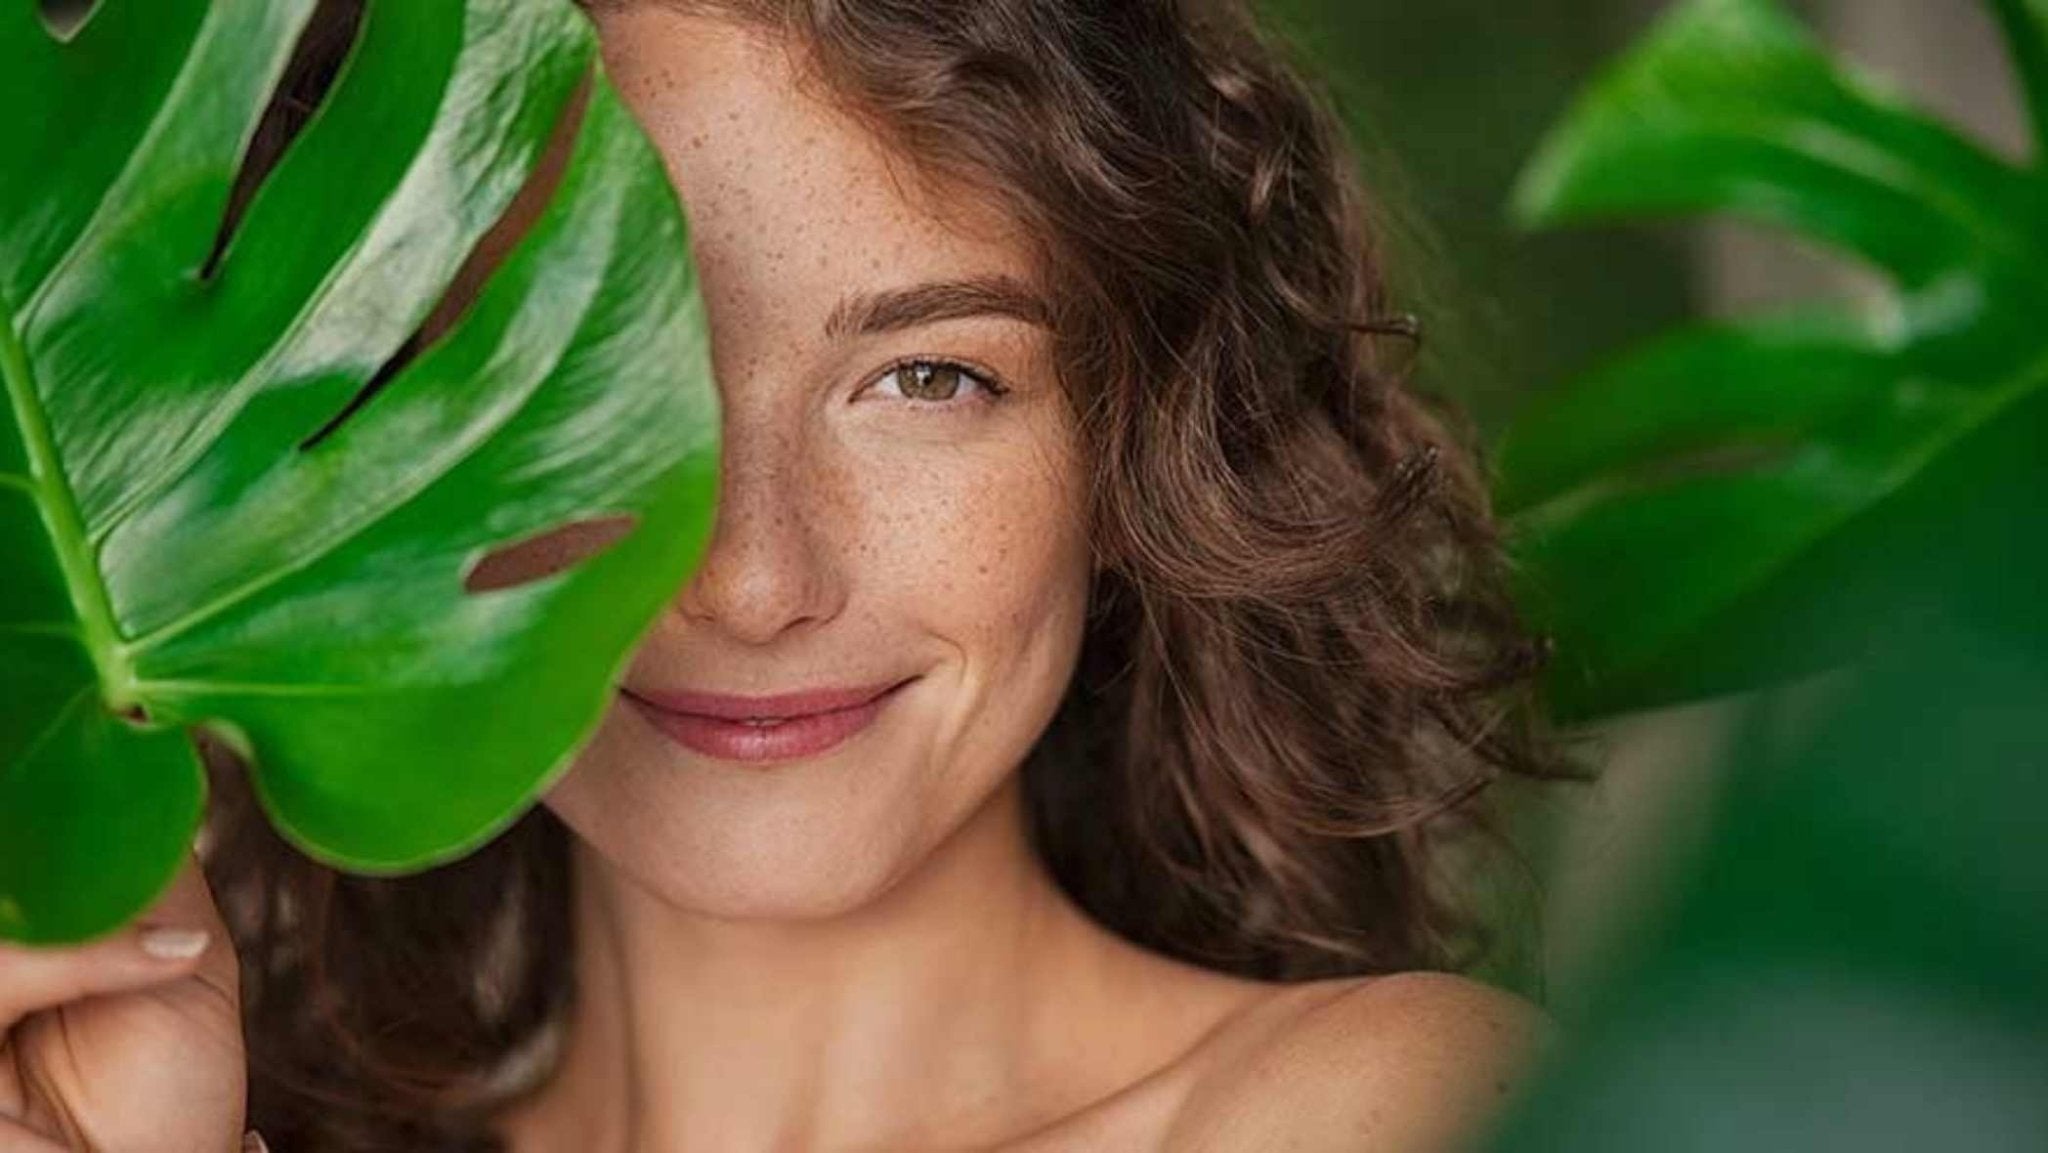 Going green: The benefits of natural skincare for you and the planet - French Beauty Co.